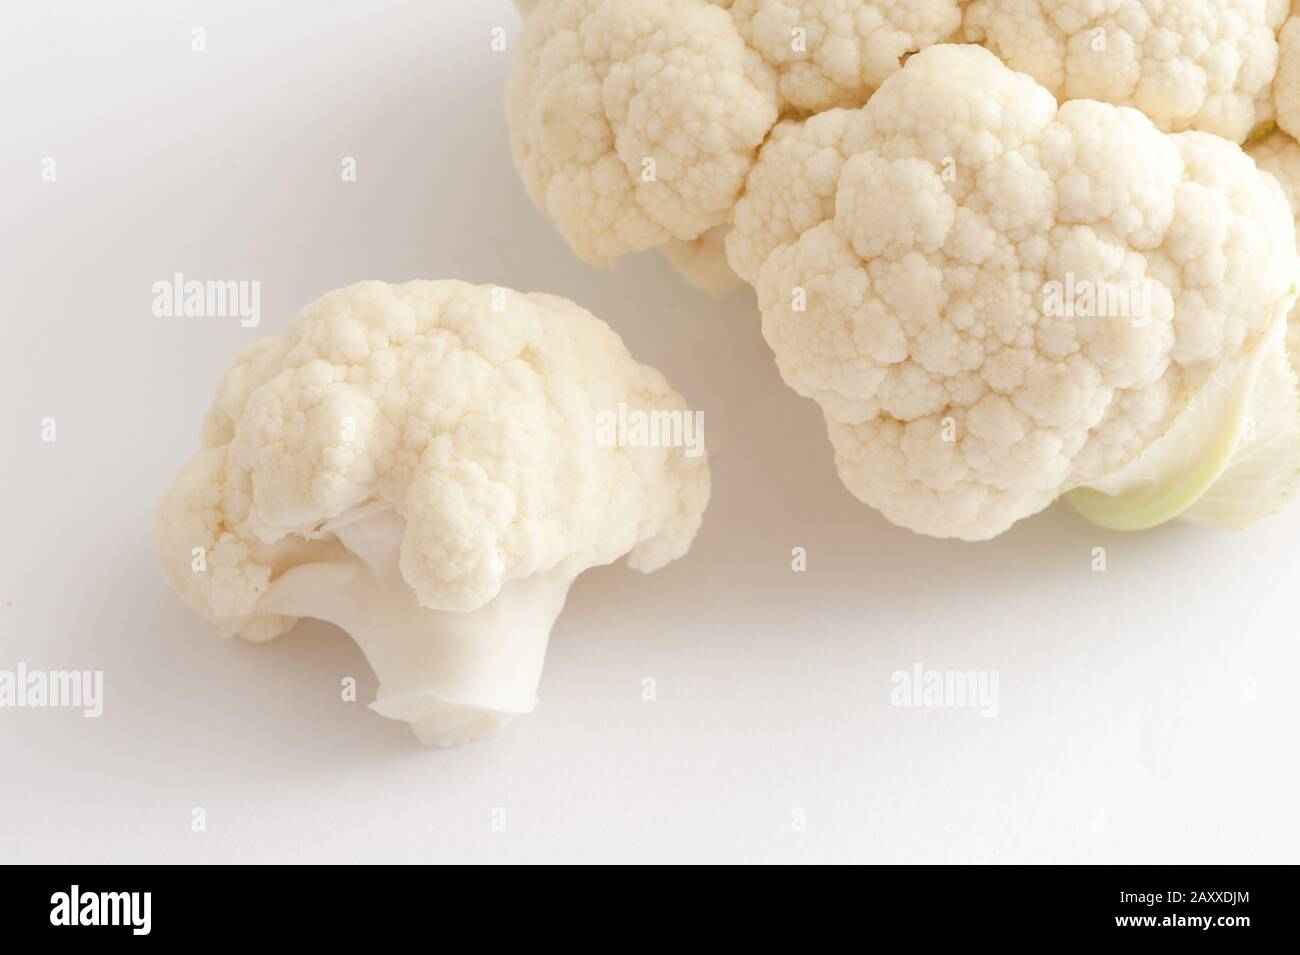 Focus to a single floret of fresh uncooked white cauliflower with additional florets alongside ready for cooking as a tasty healthy vegetable accompan Stock Photo